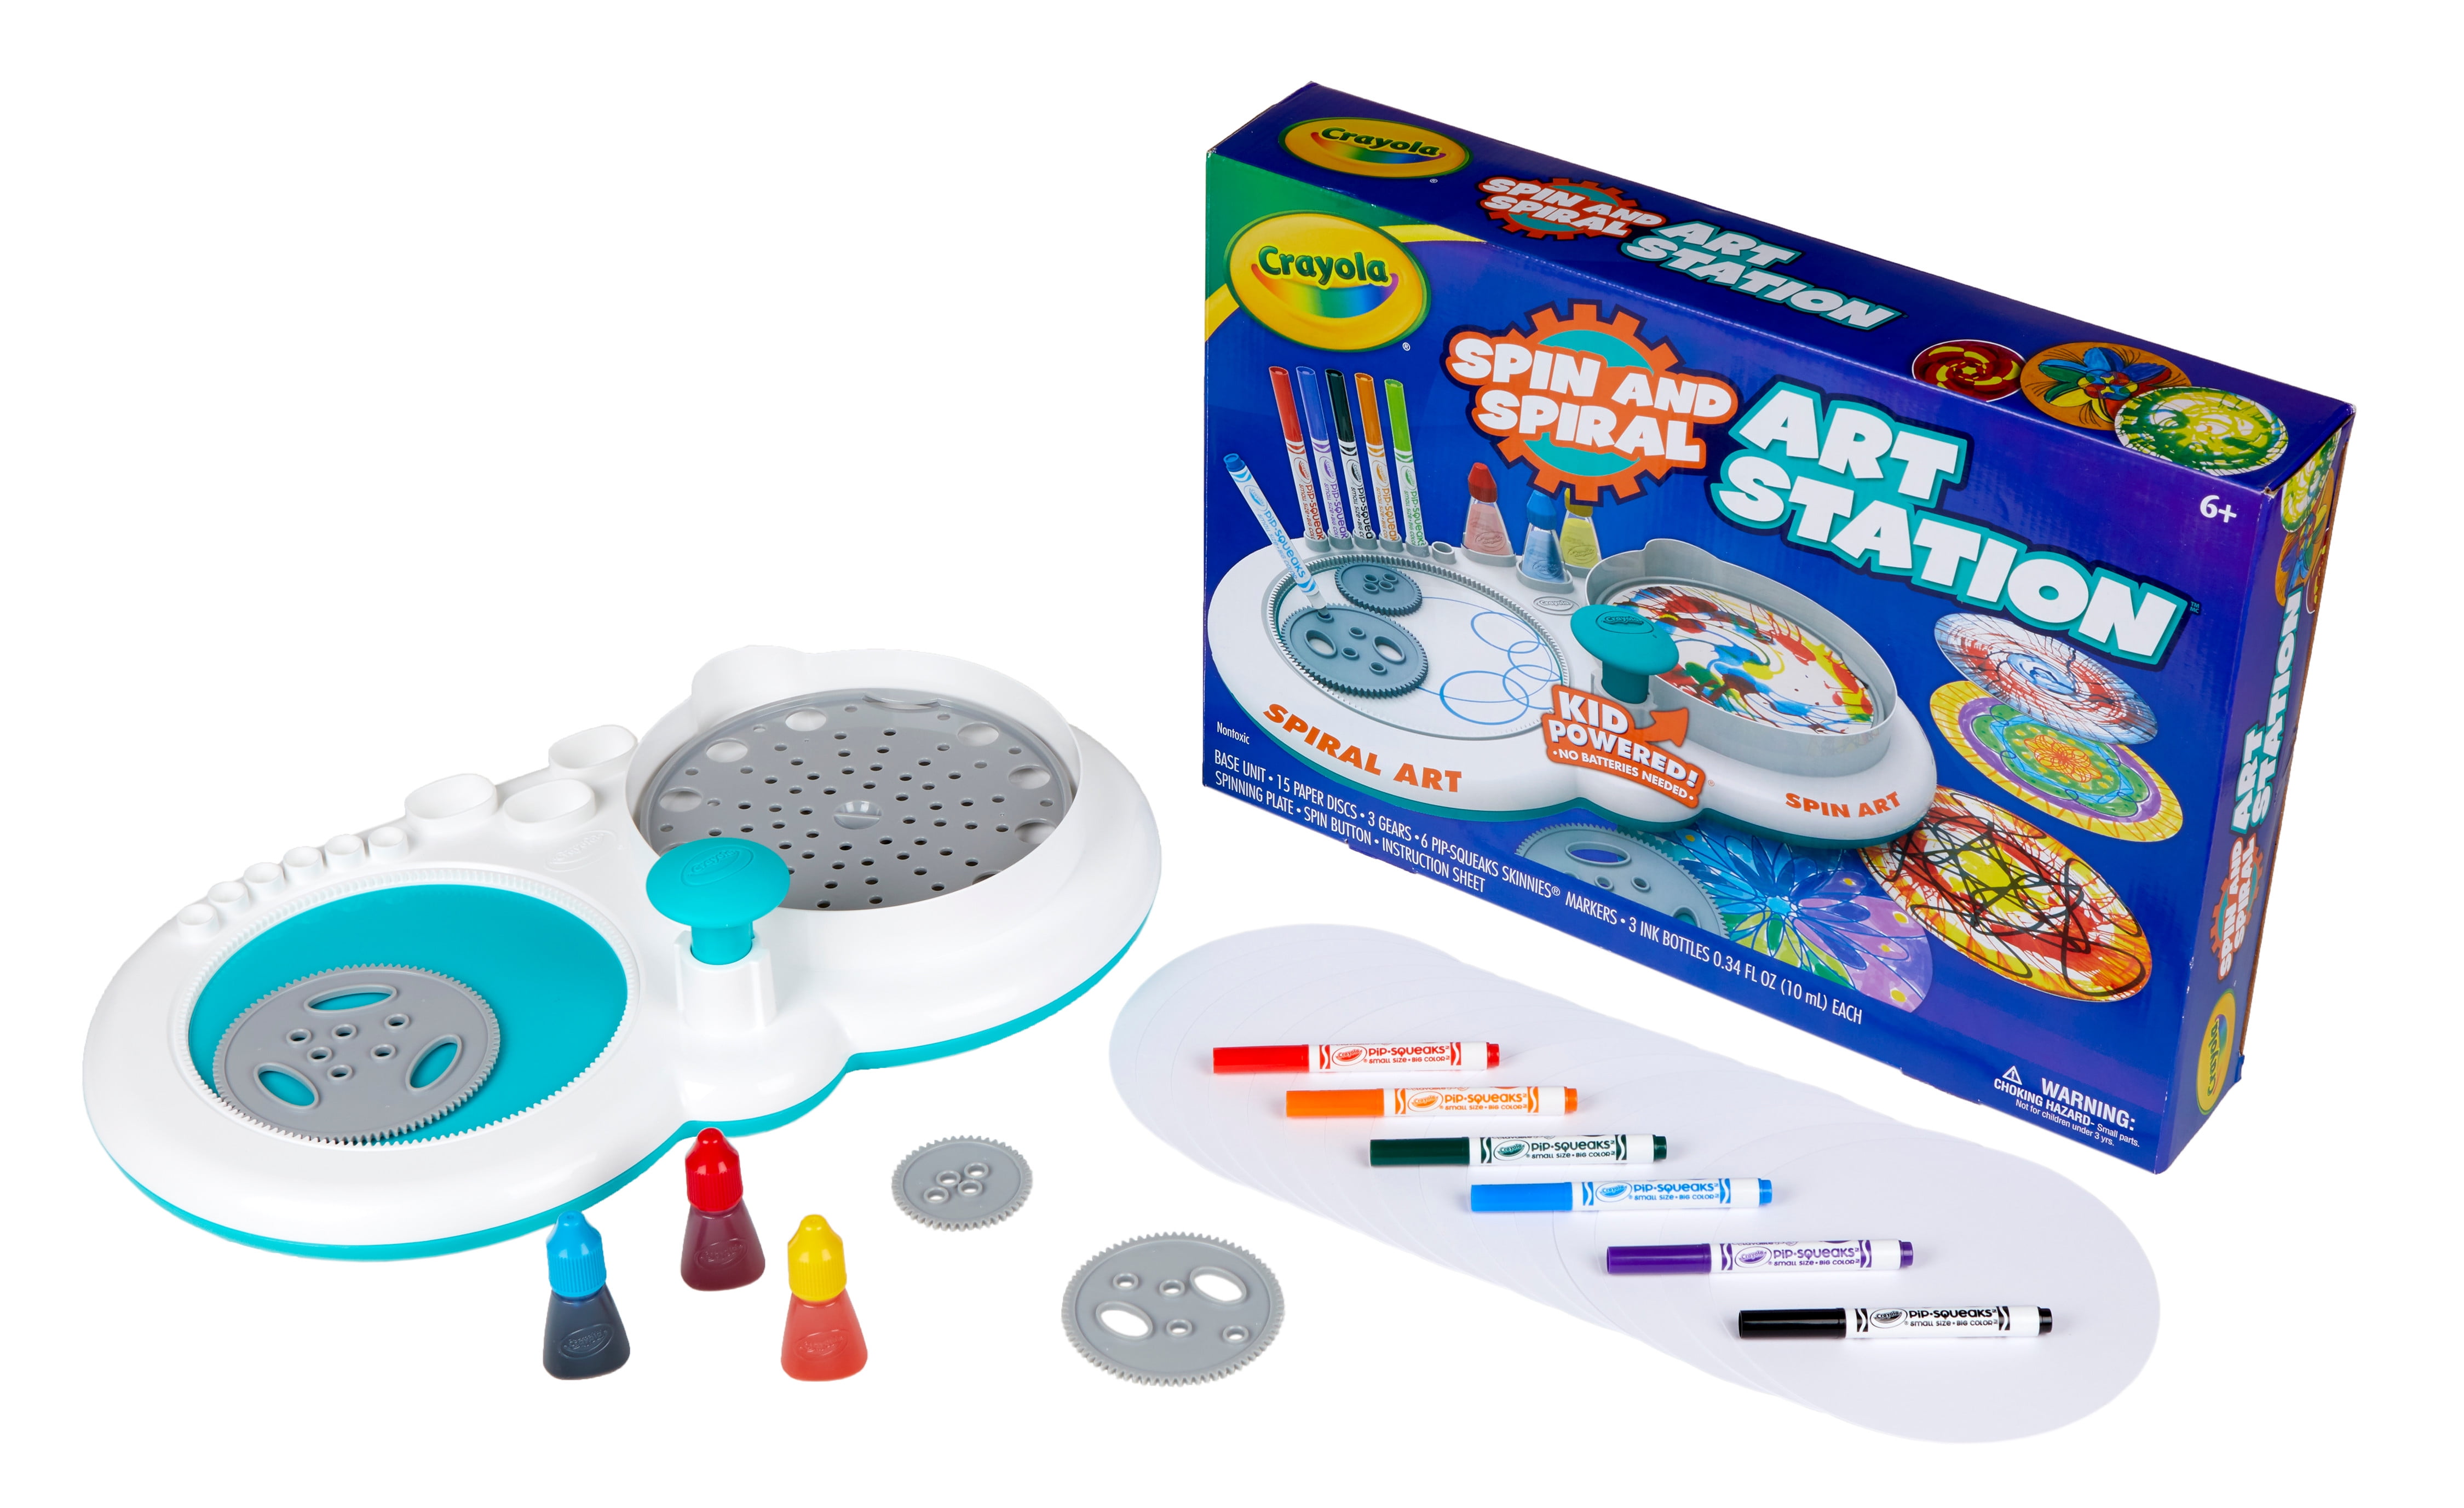 Crayola Spin and Spiral Art Station, 1 count - Fry's Food Stores